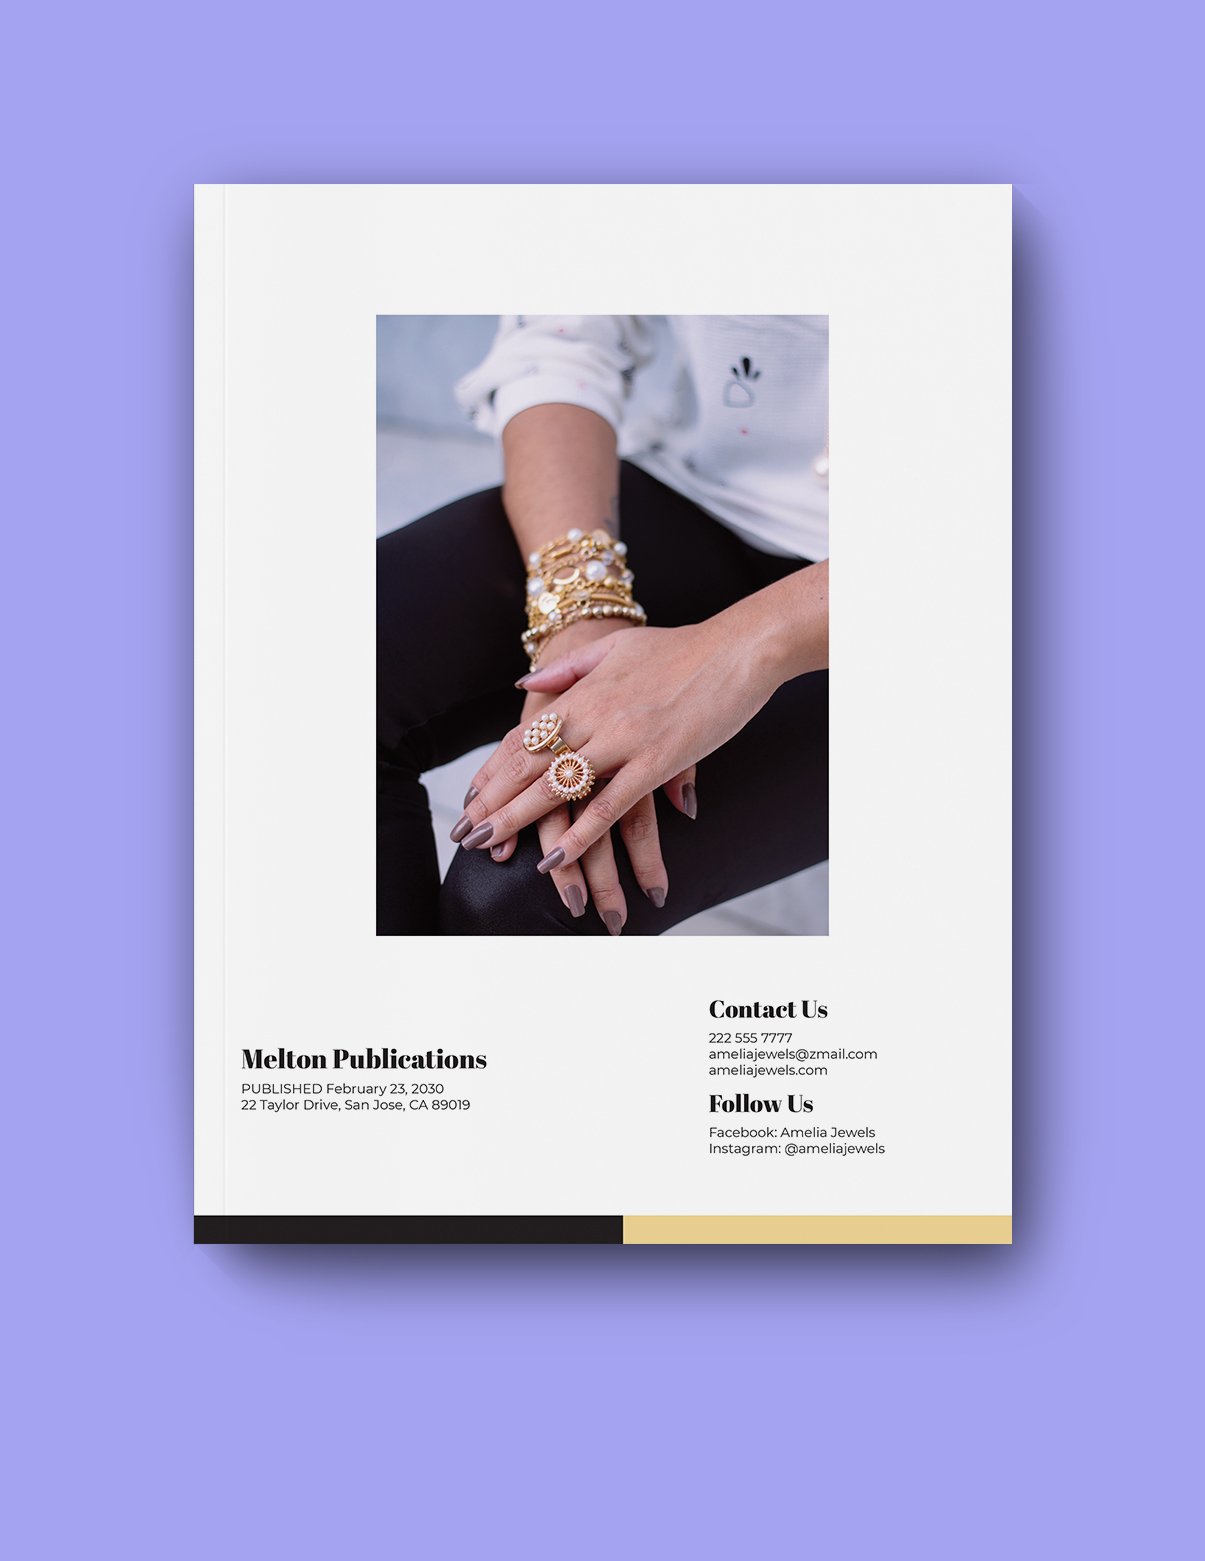 Jewelry Product Catalog Template